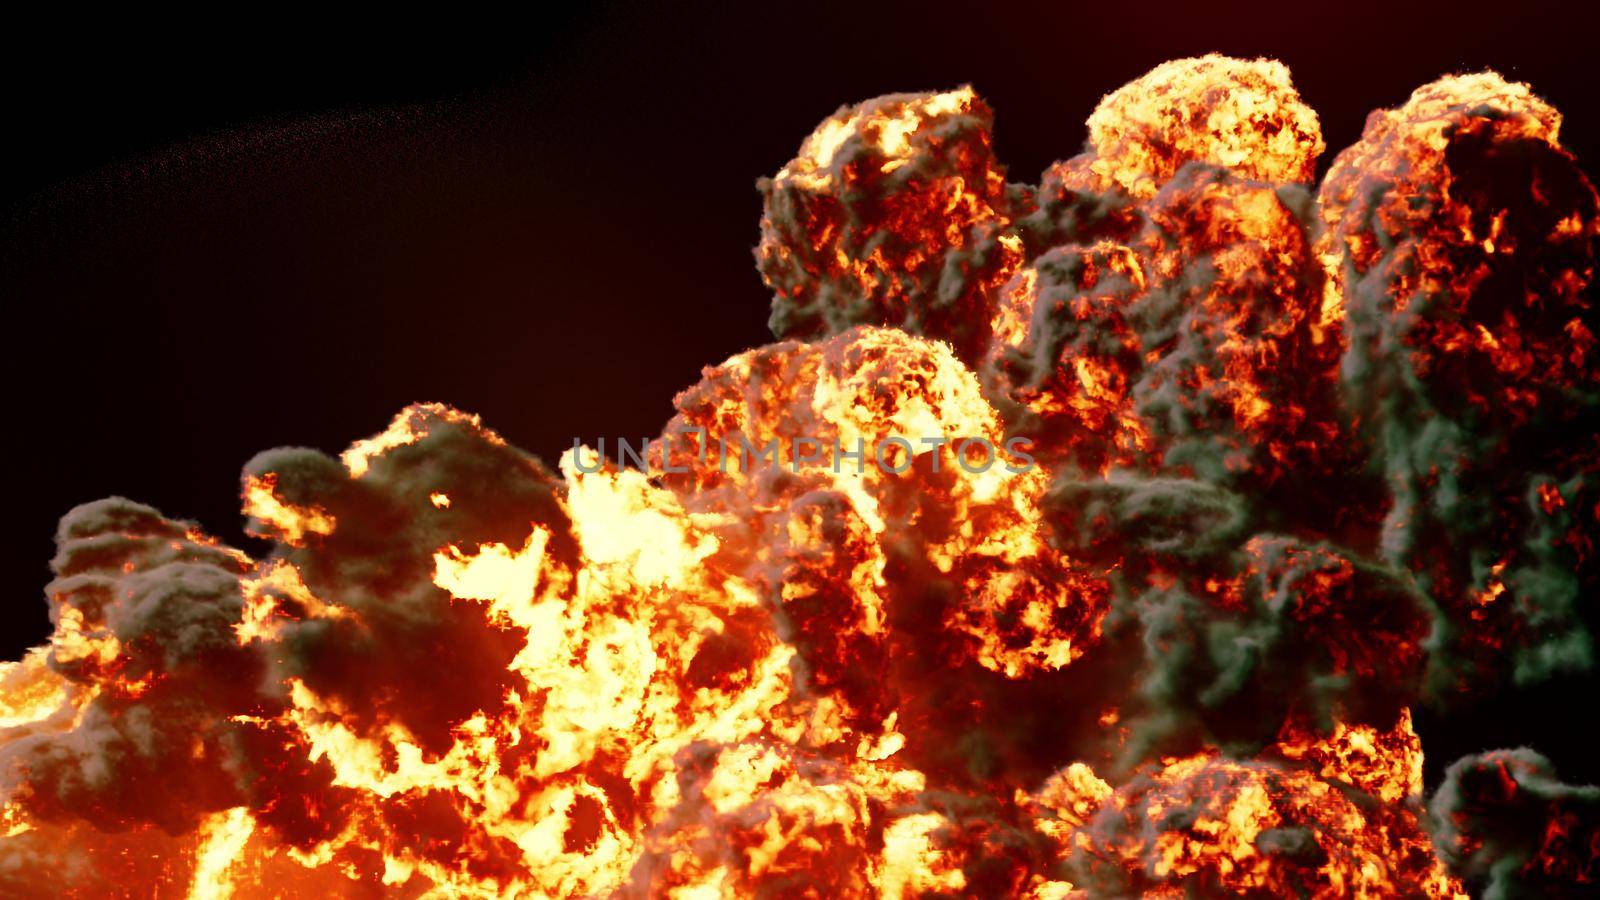 Burning fuel. Close-up of a flame burning fuel with thick black smoke. 3D Rendering by designprojects